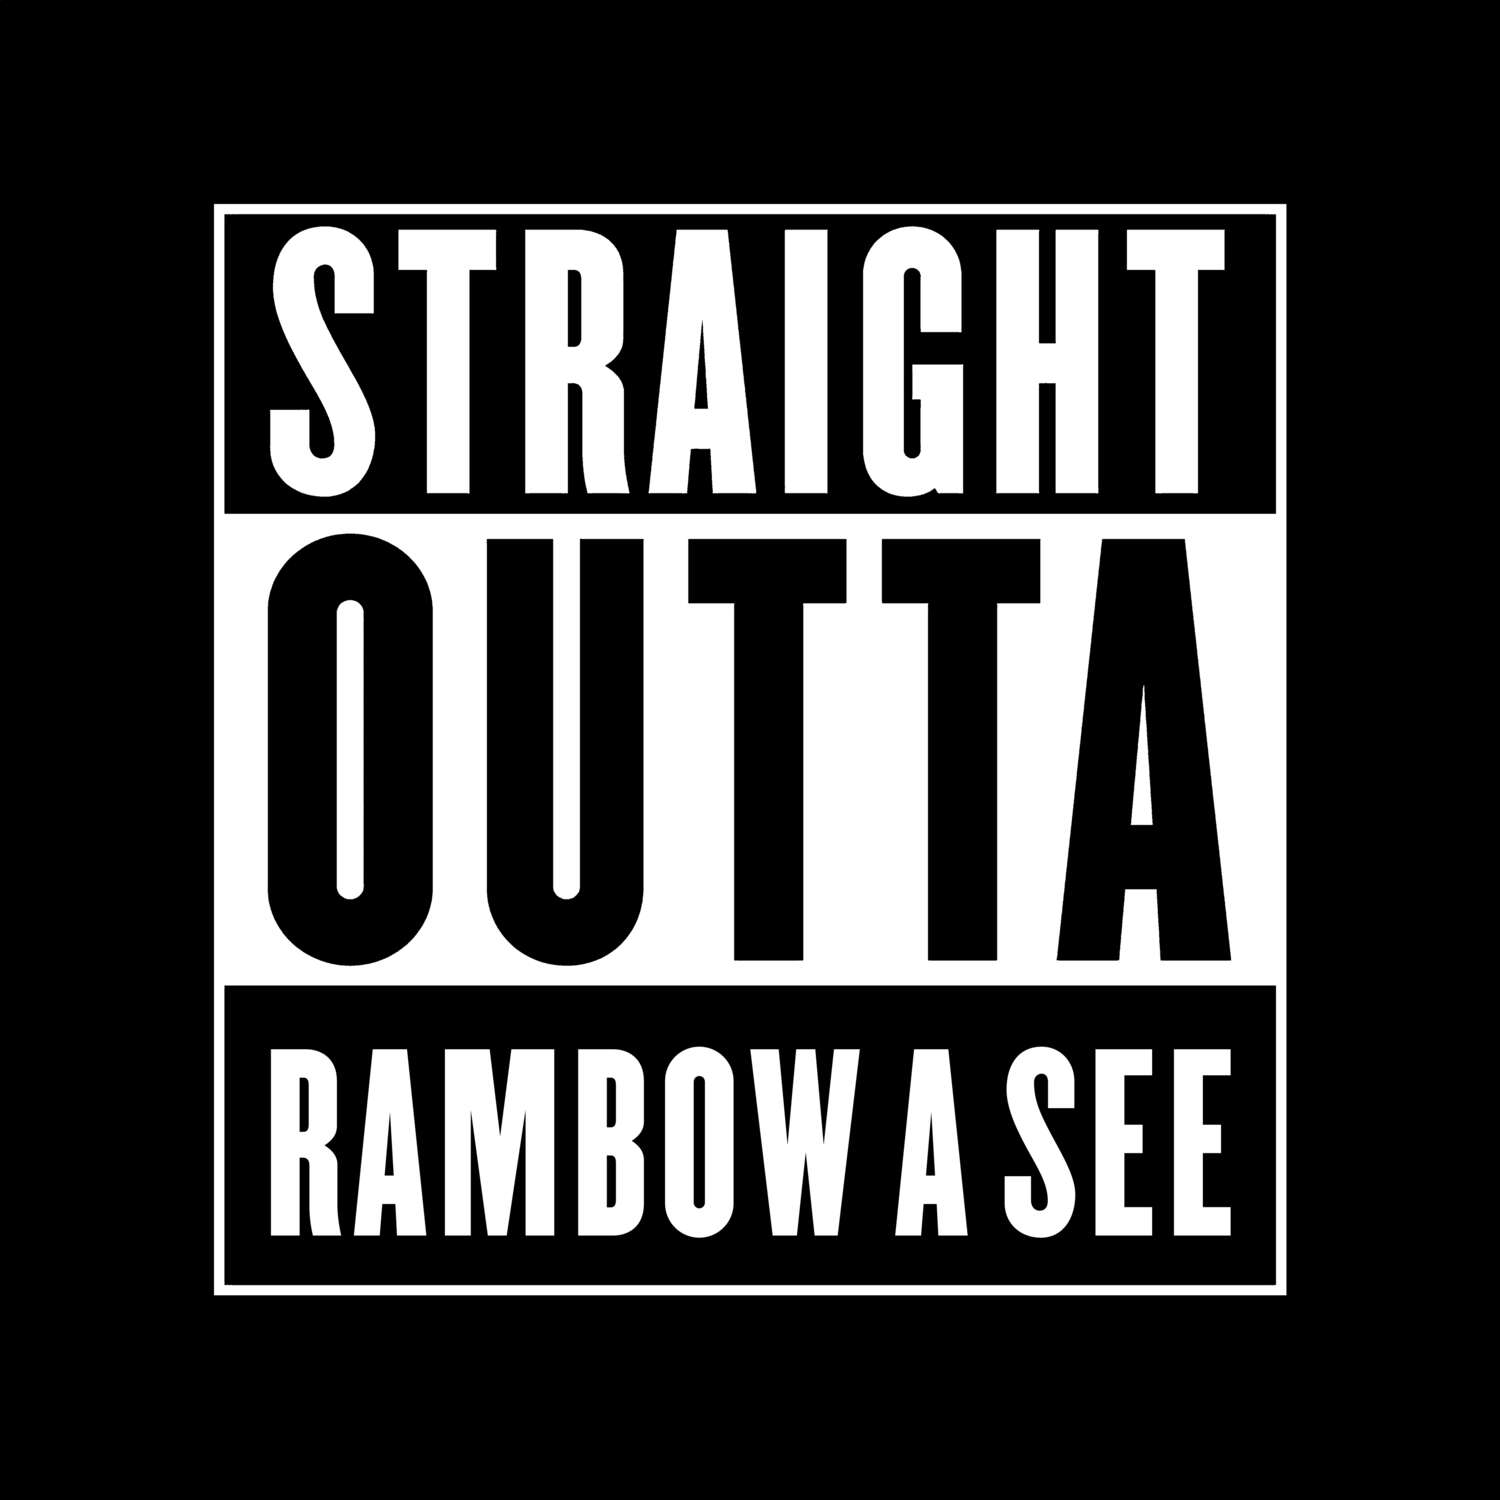 Rambow a See T-Shirt »Straight Outta«